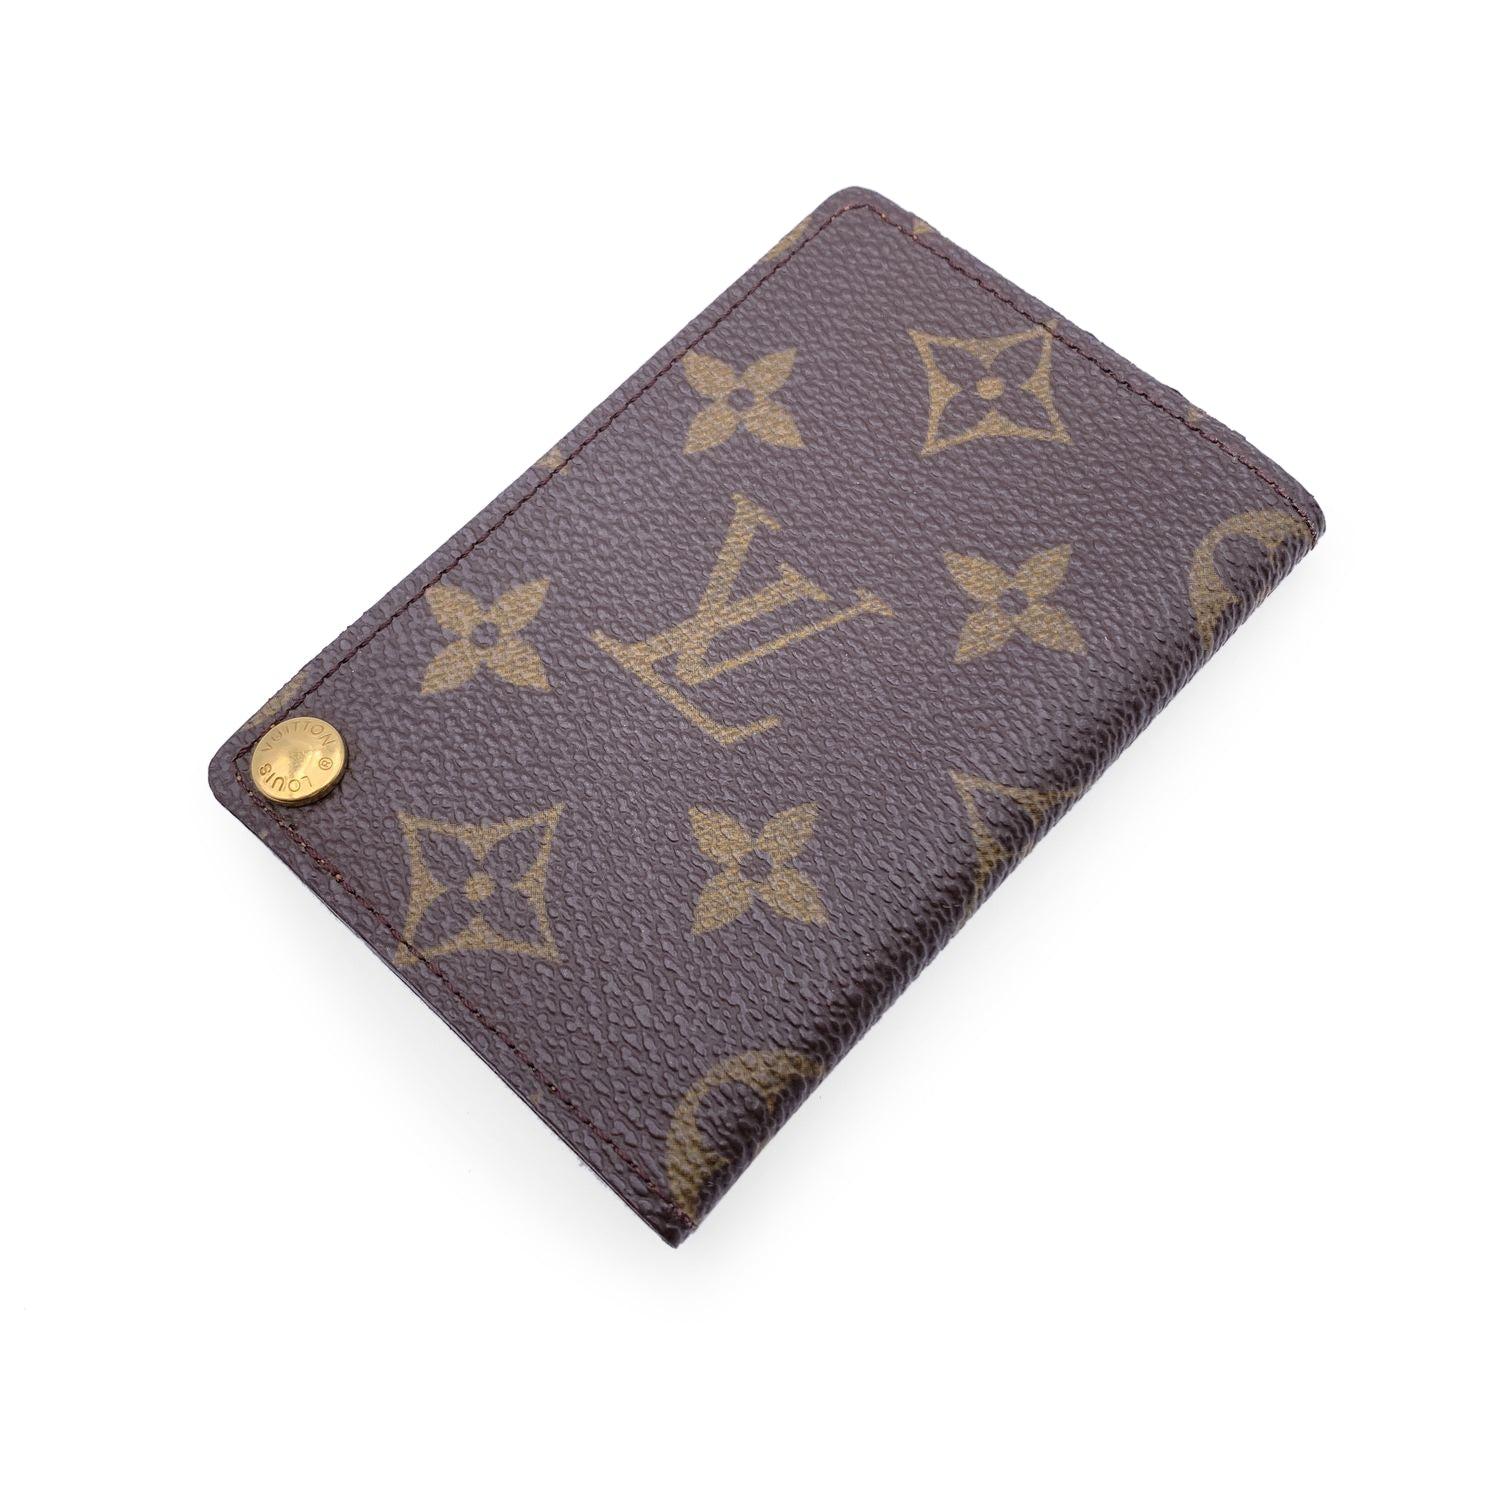 Vintage Louis Vuitton Porte Carte Pression Card Holder. Crafted in brown monogram canvas. Tan leather lining. 7 plastic slots for cards. 'Louis Vuitton Paris - Made in France' embossed inside. Authenticity serial number embossed inside Details